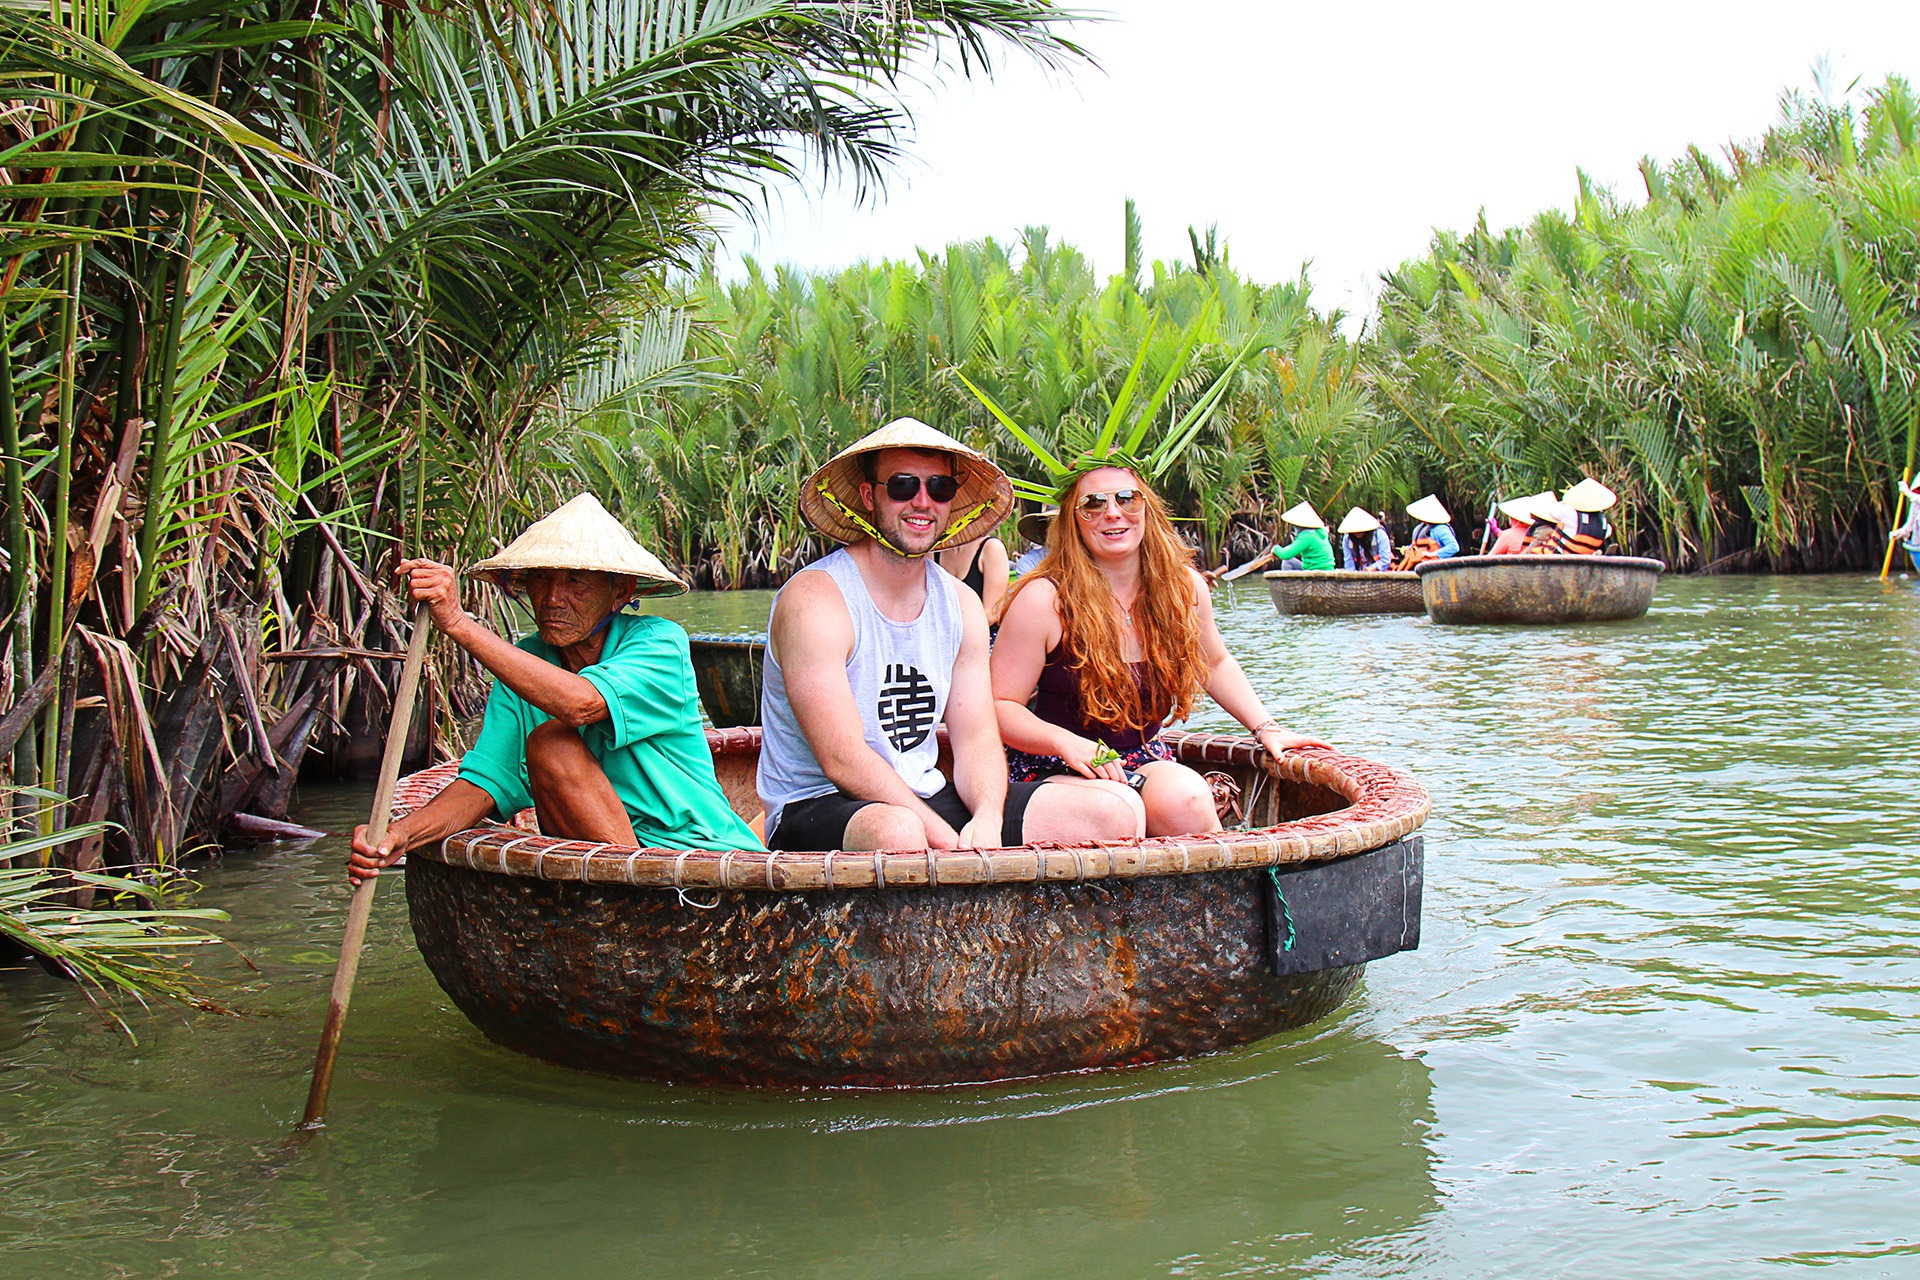 Swap your cellphone for a basket boat and explore the beauty of the Bay Mau Coconut Forest in Hoi An